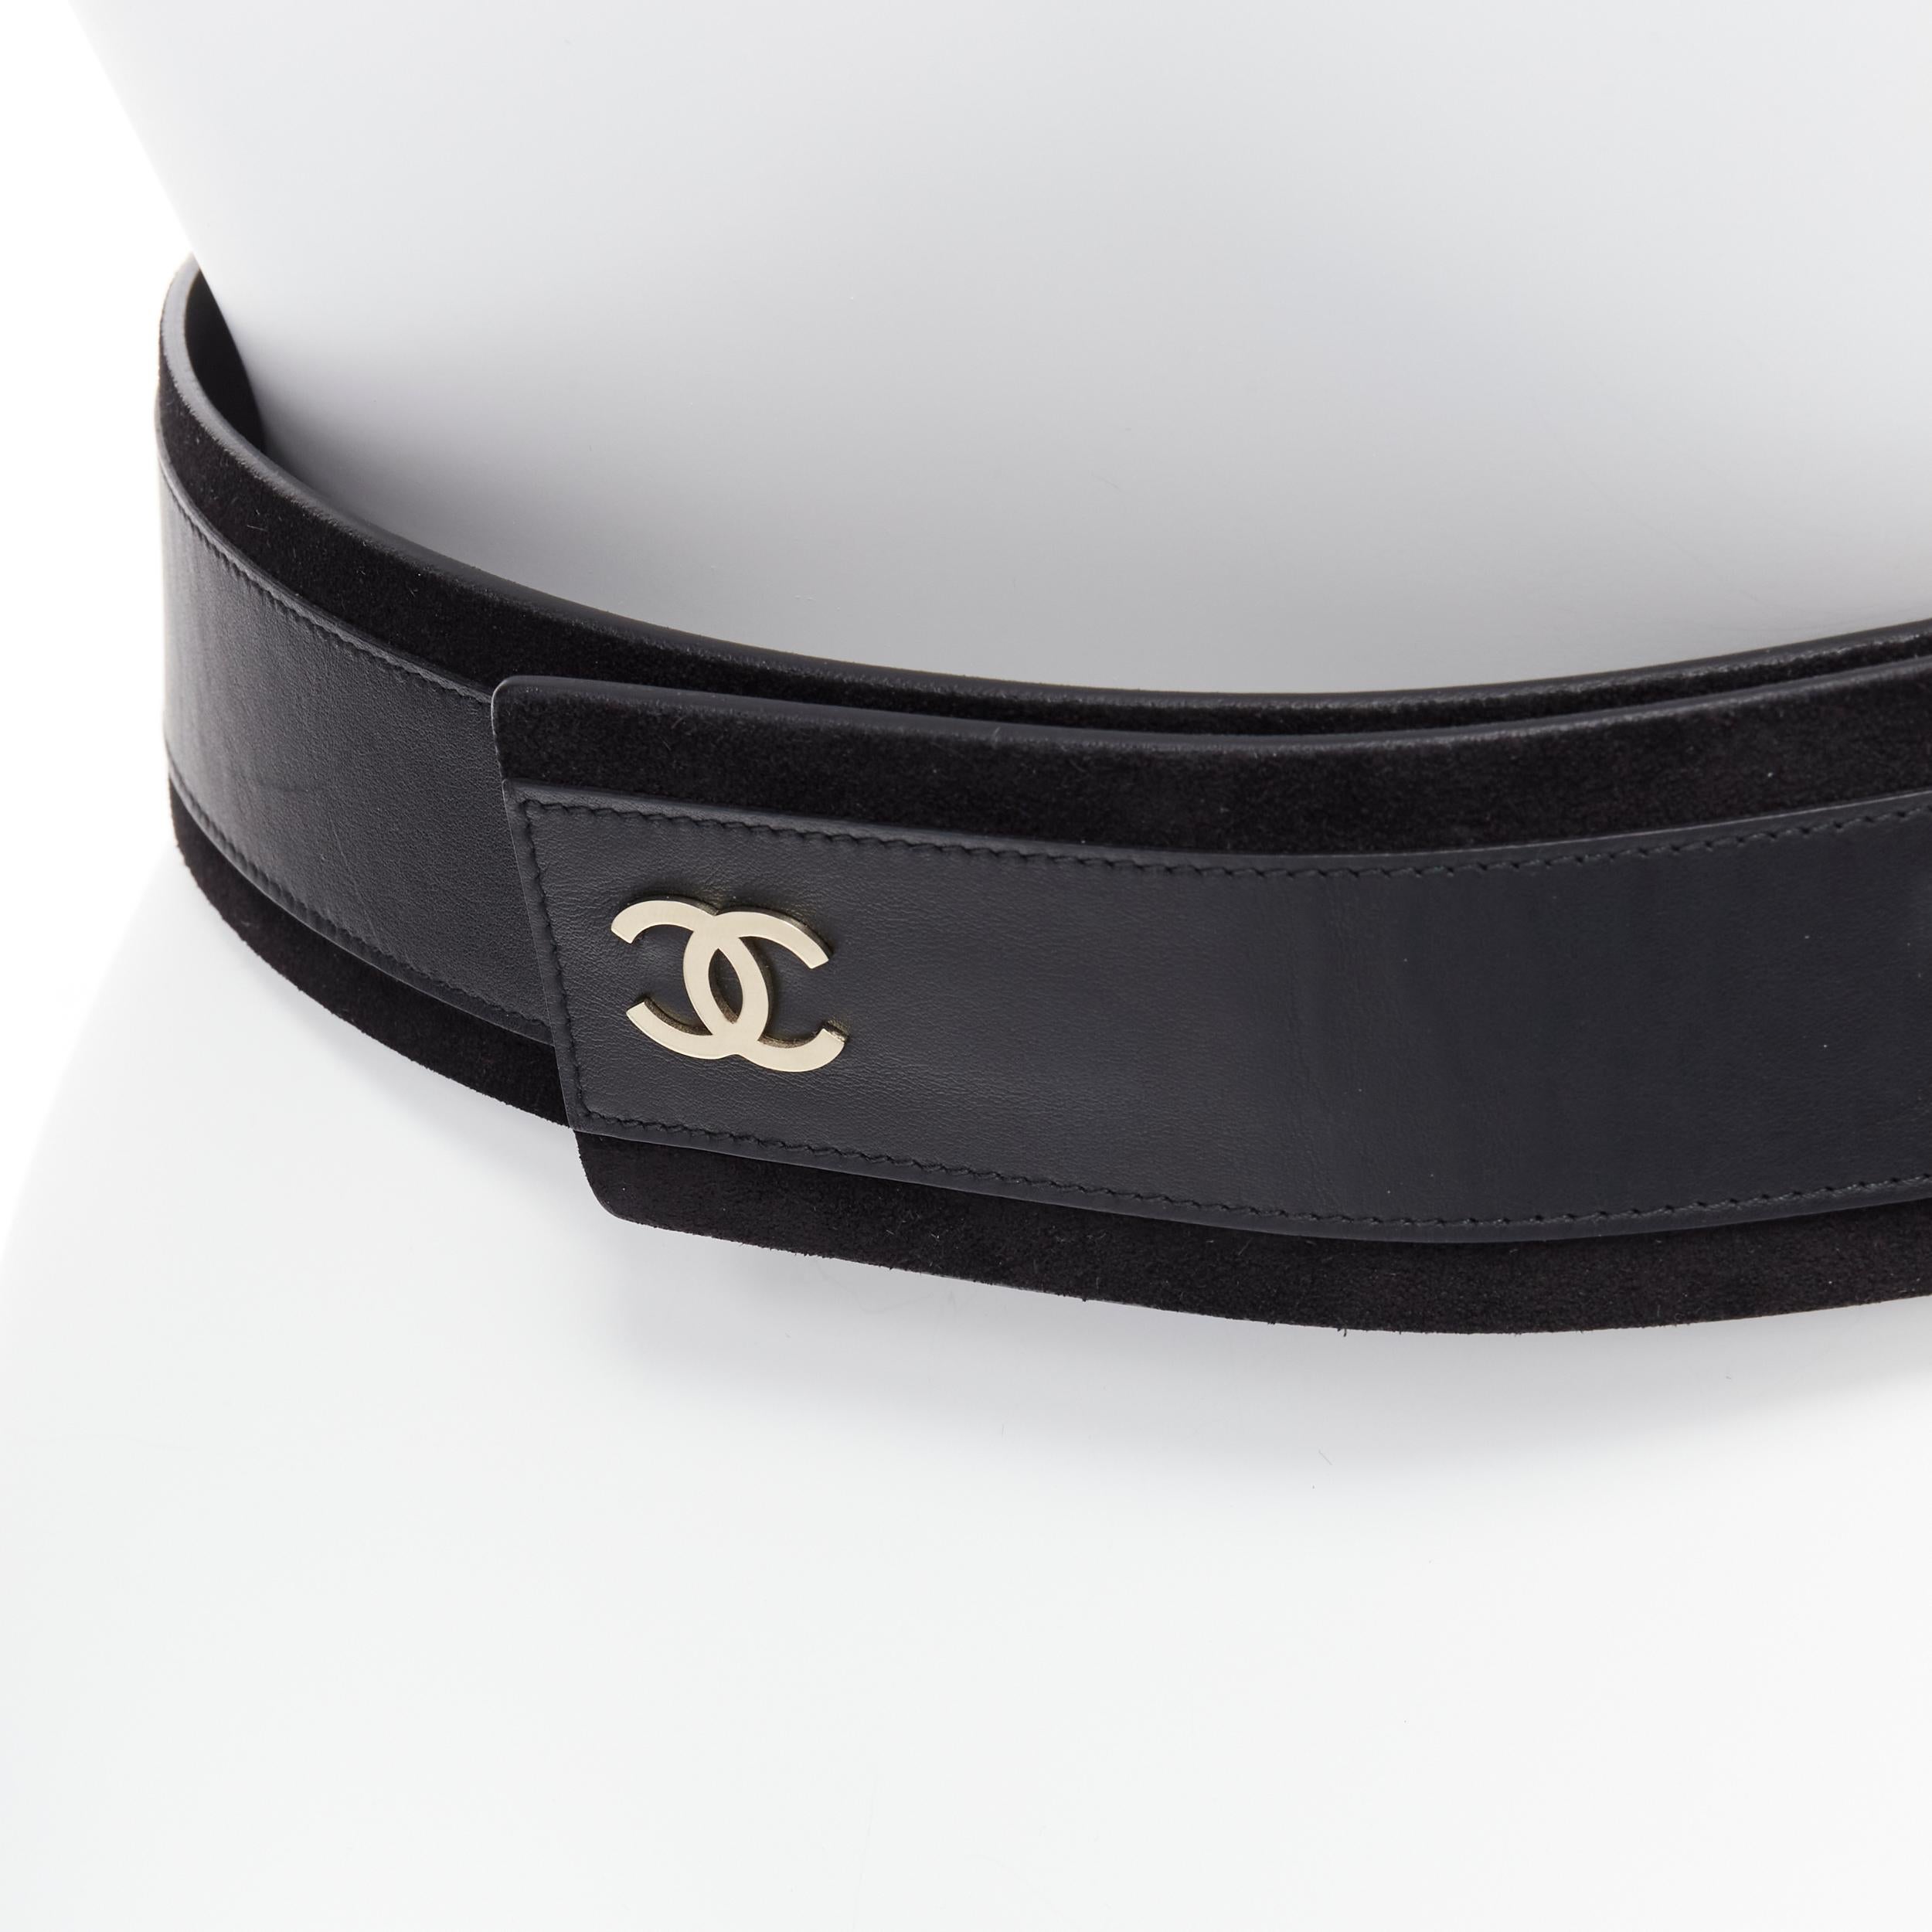 CHANEL B16A CC logo crystal gold metal hoop black leather waist belt 70cm
Reference: AAWC/A00500
Brand: Chanel
Designer: Virginie Viard
Collection: B16A
Material: Leather, Suede, Metal
Color: Black, Gold
Pattern: Solid
Closure: Belt
Lining: Black